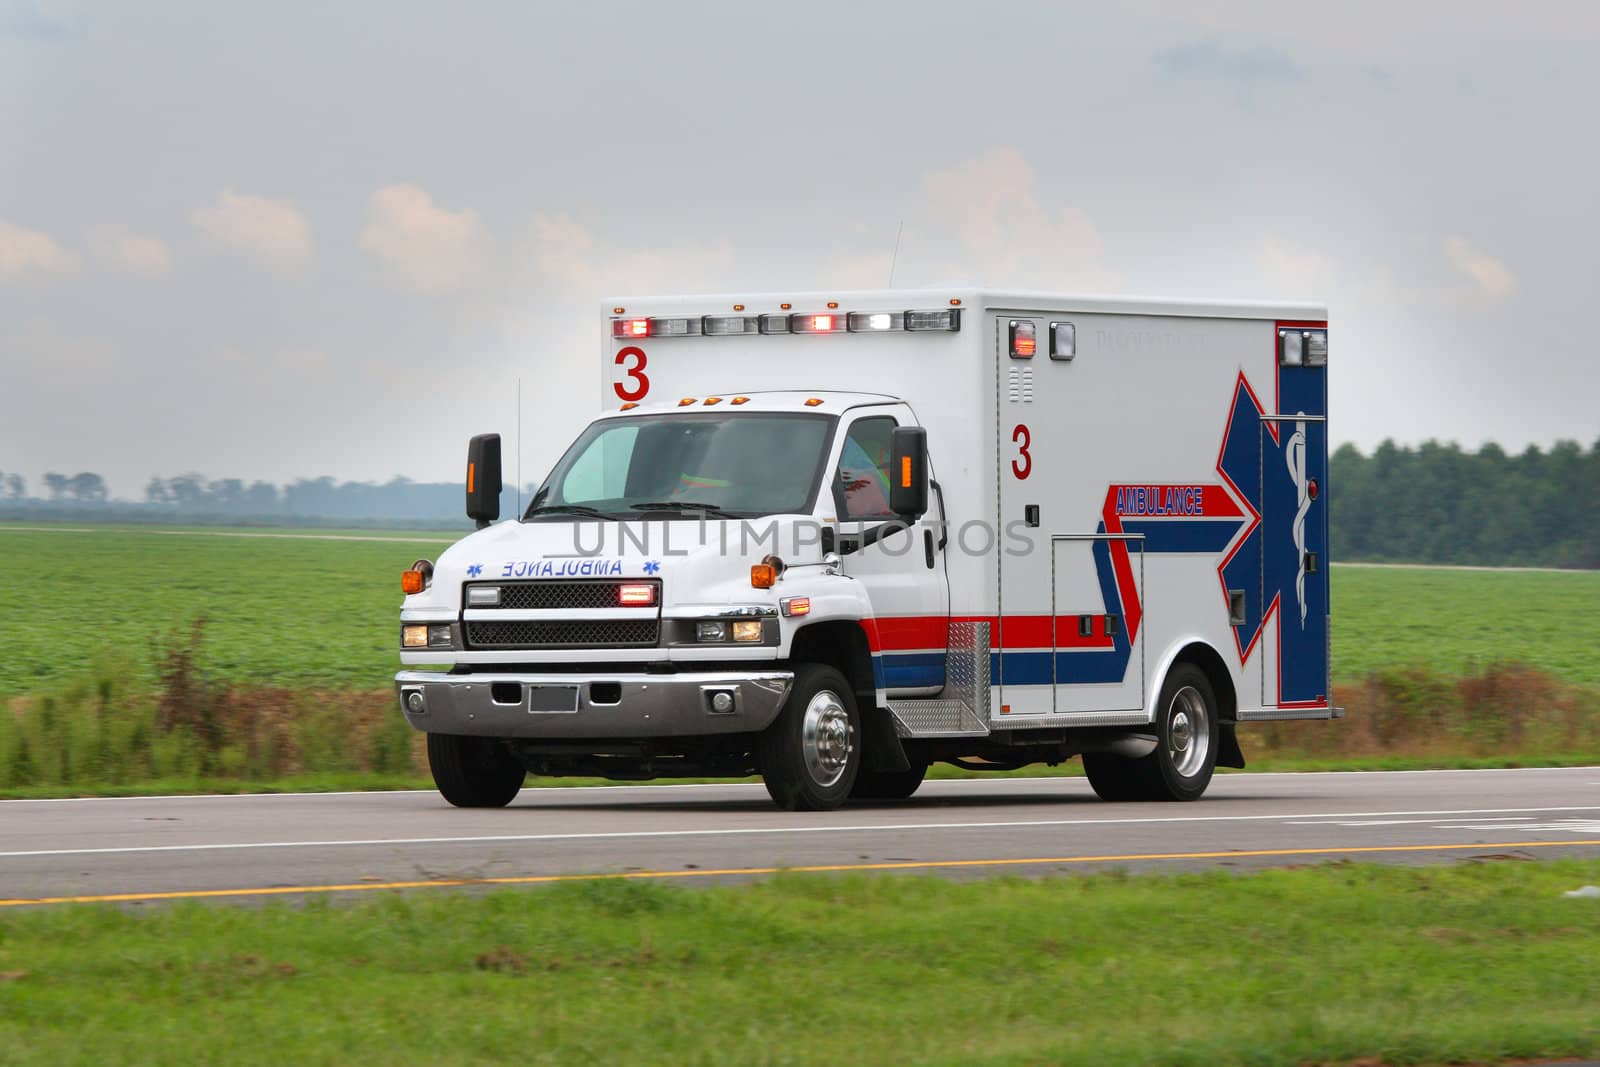 an ambulance on the road